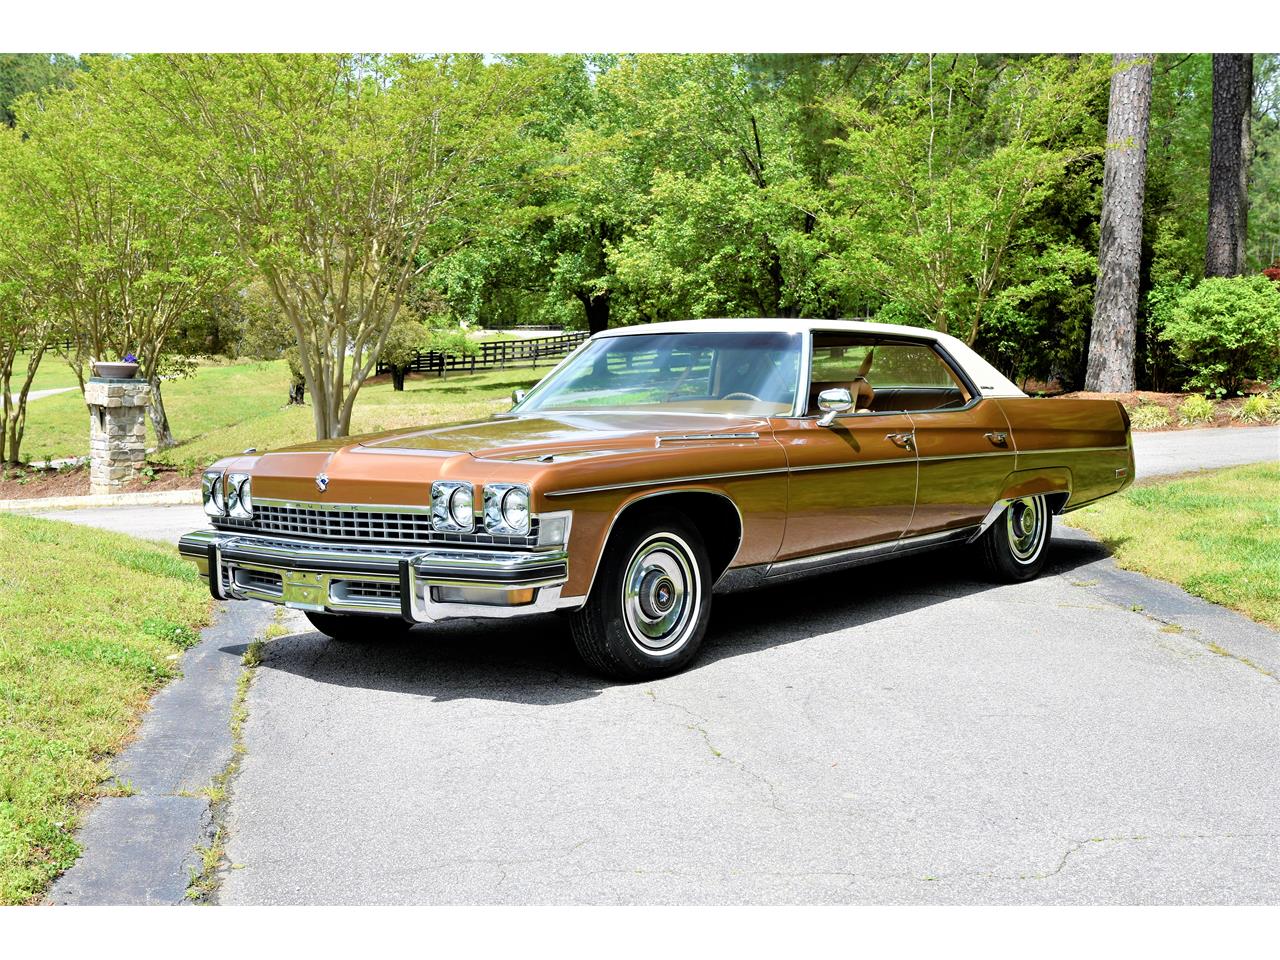 For Sale at Auction: 1974 Buick Electra 225 in.